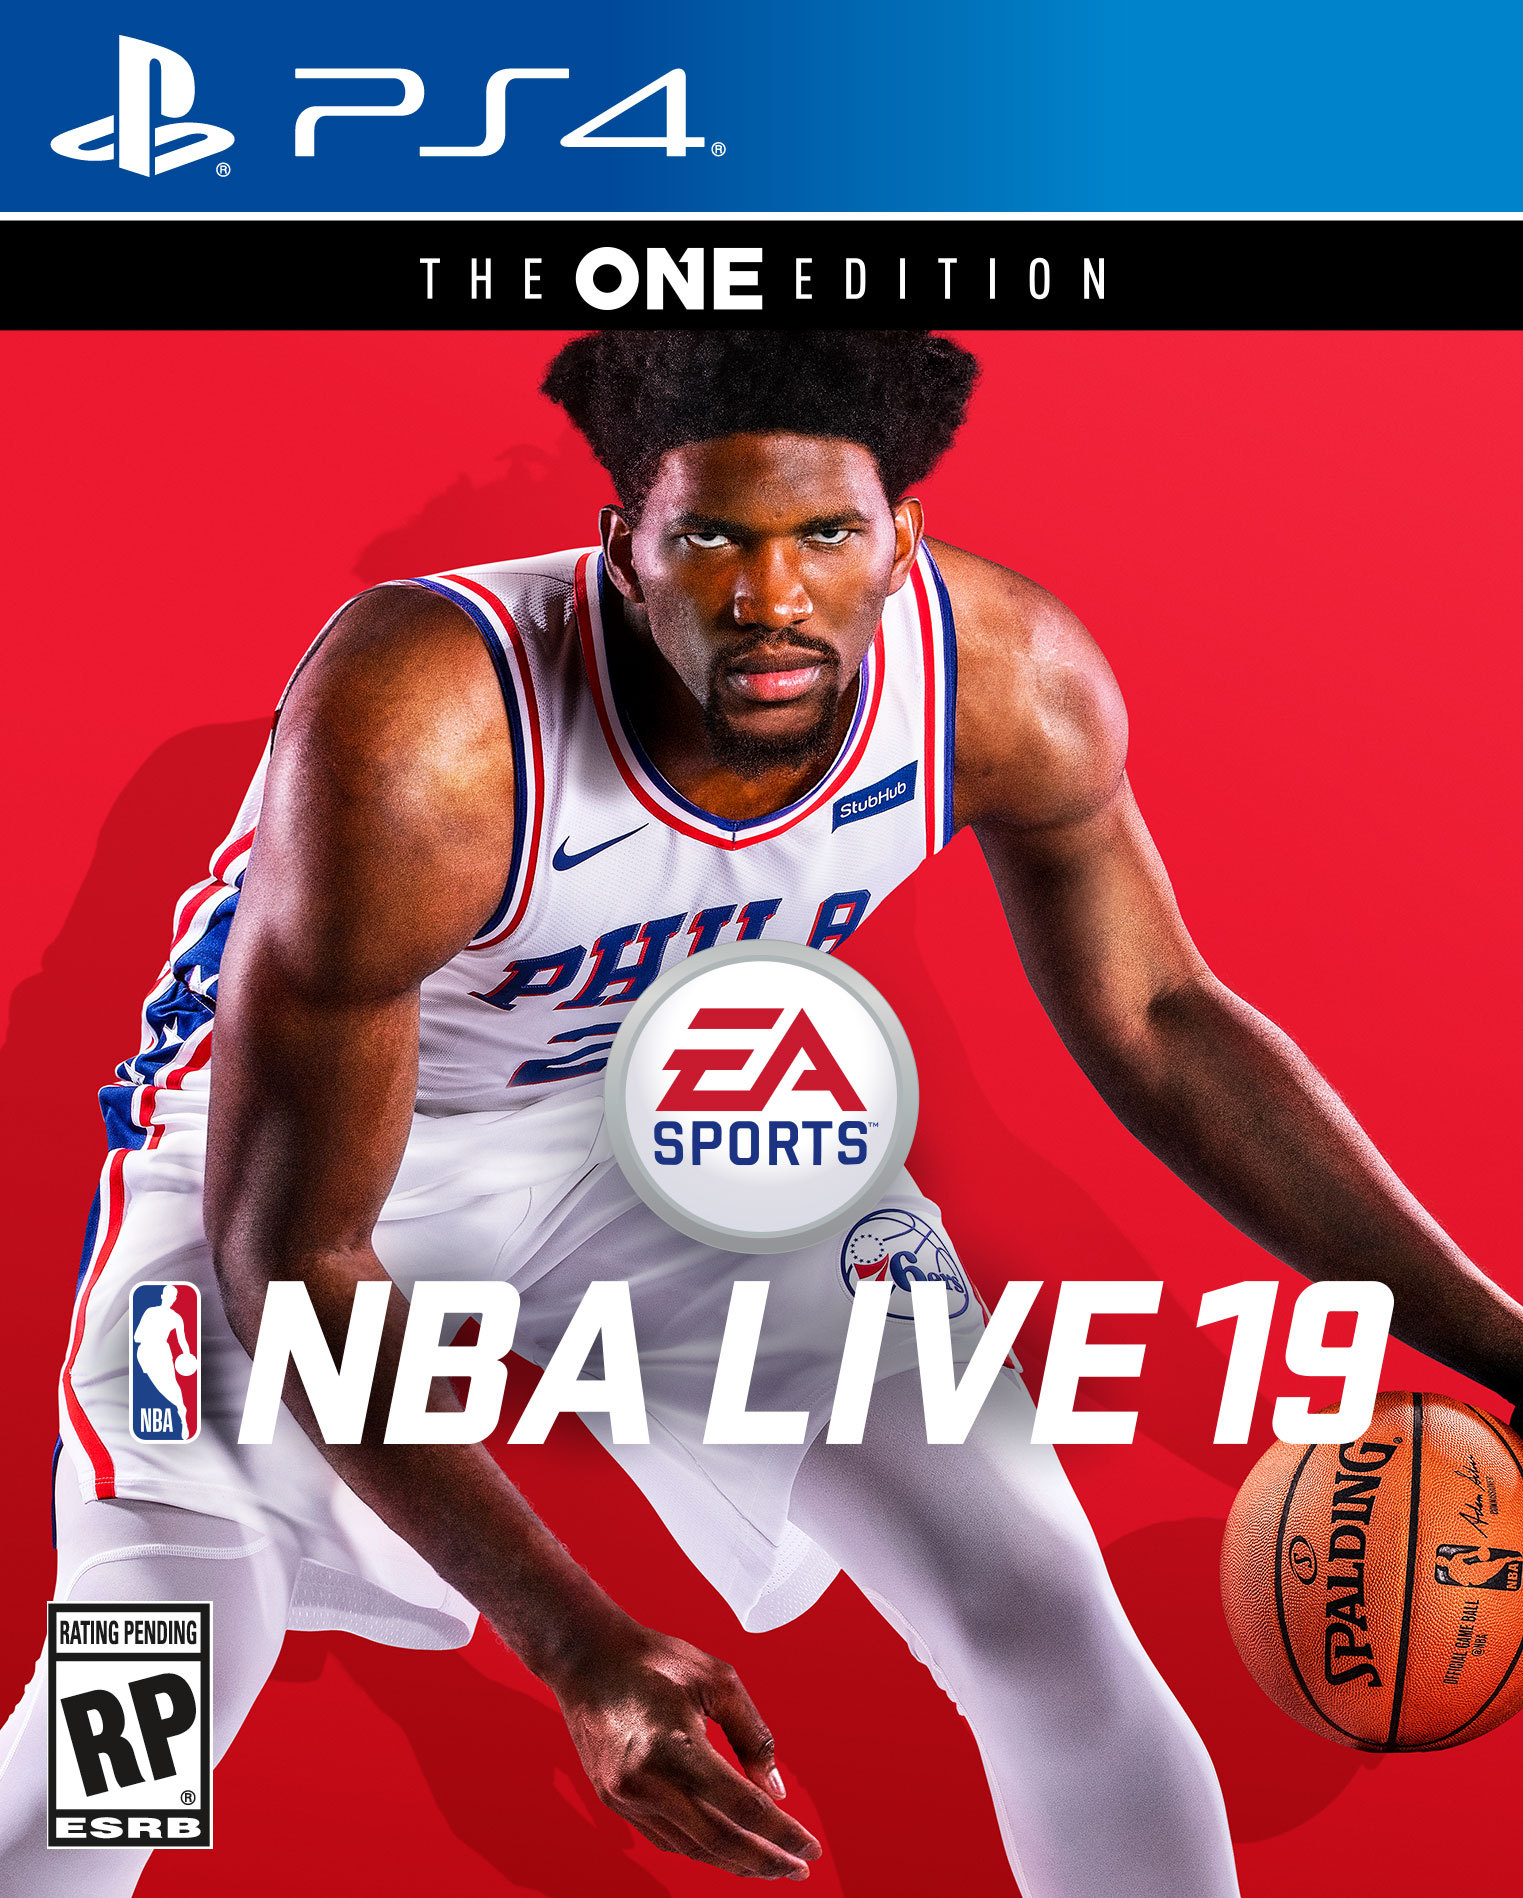 Joel Embiid Lands EA SPORTS NBA LIVE 19 Cover, Prepares to Take on the World Business Wire